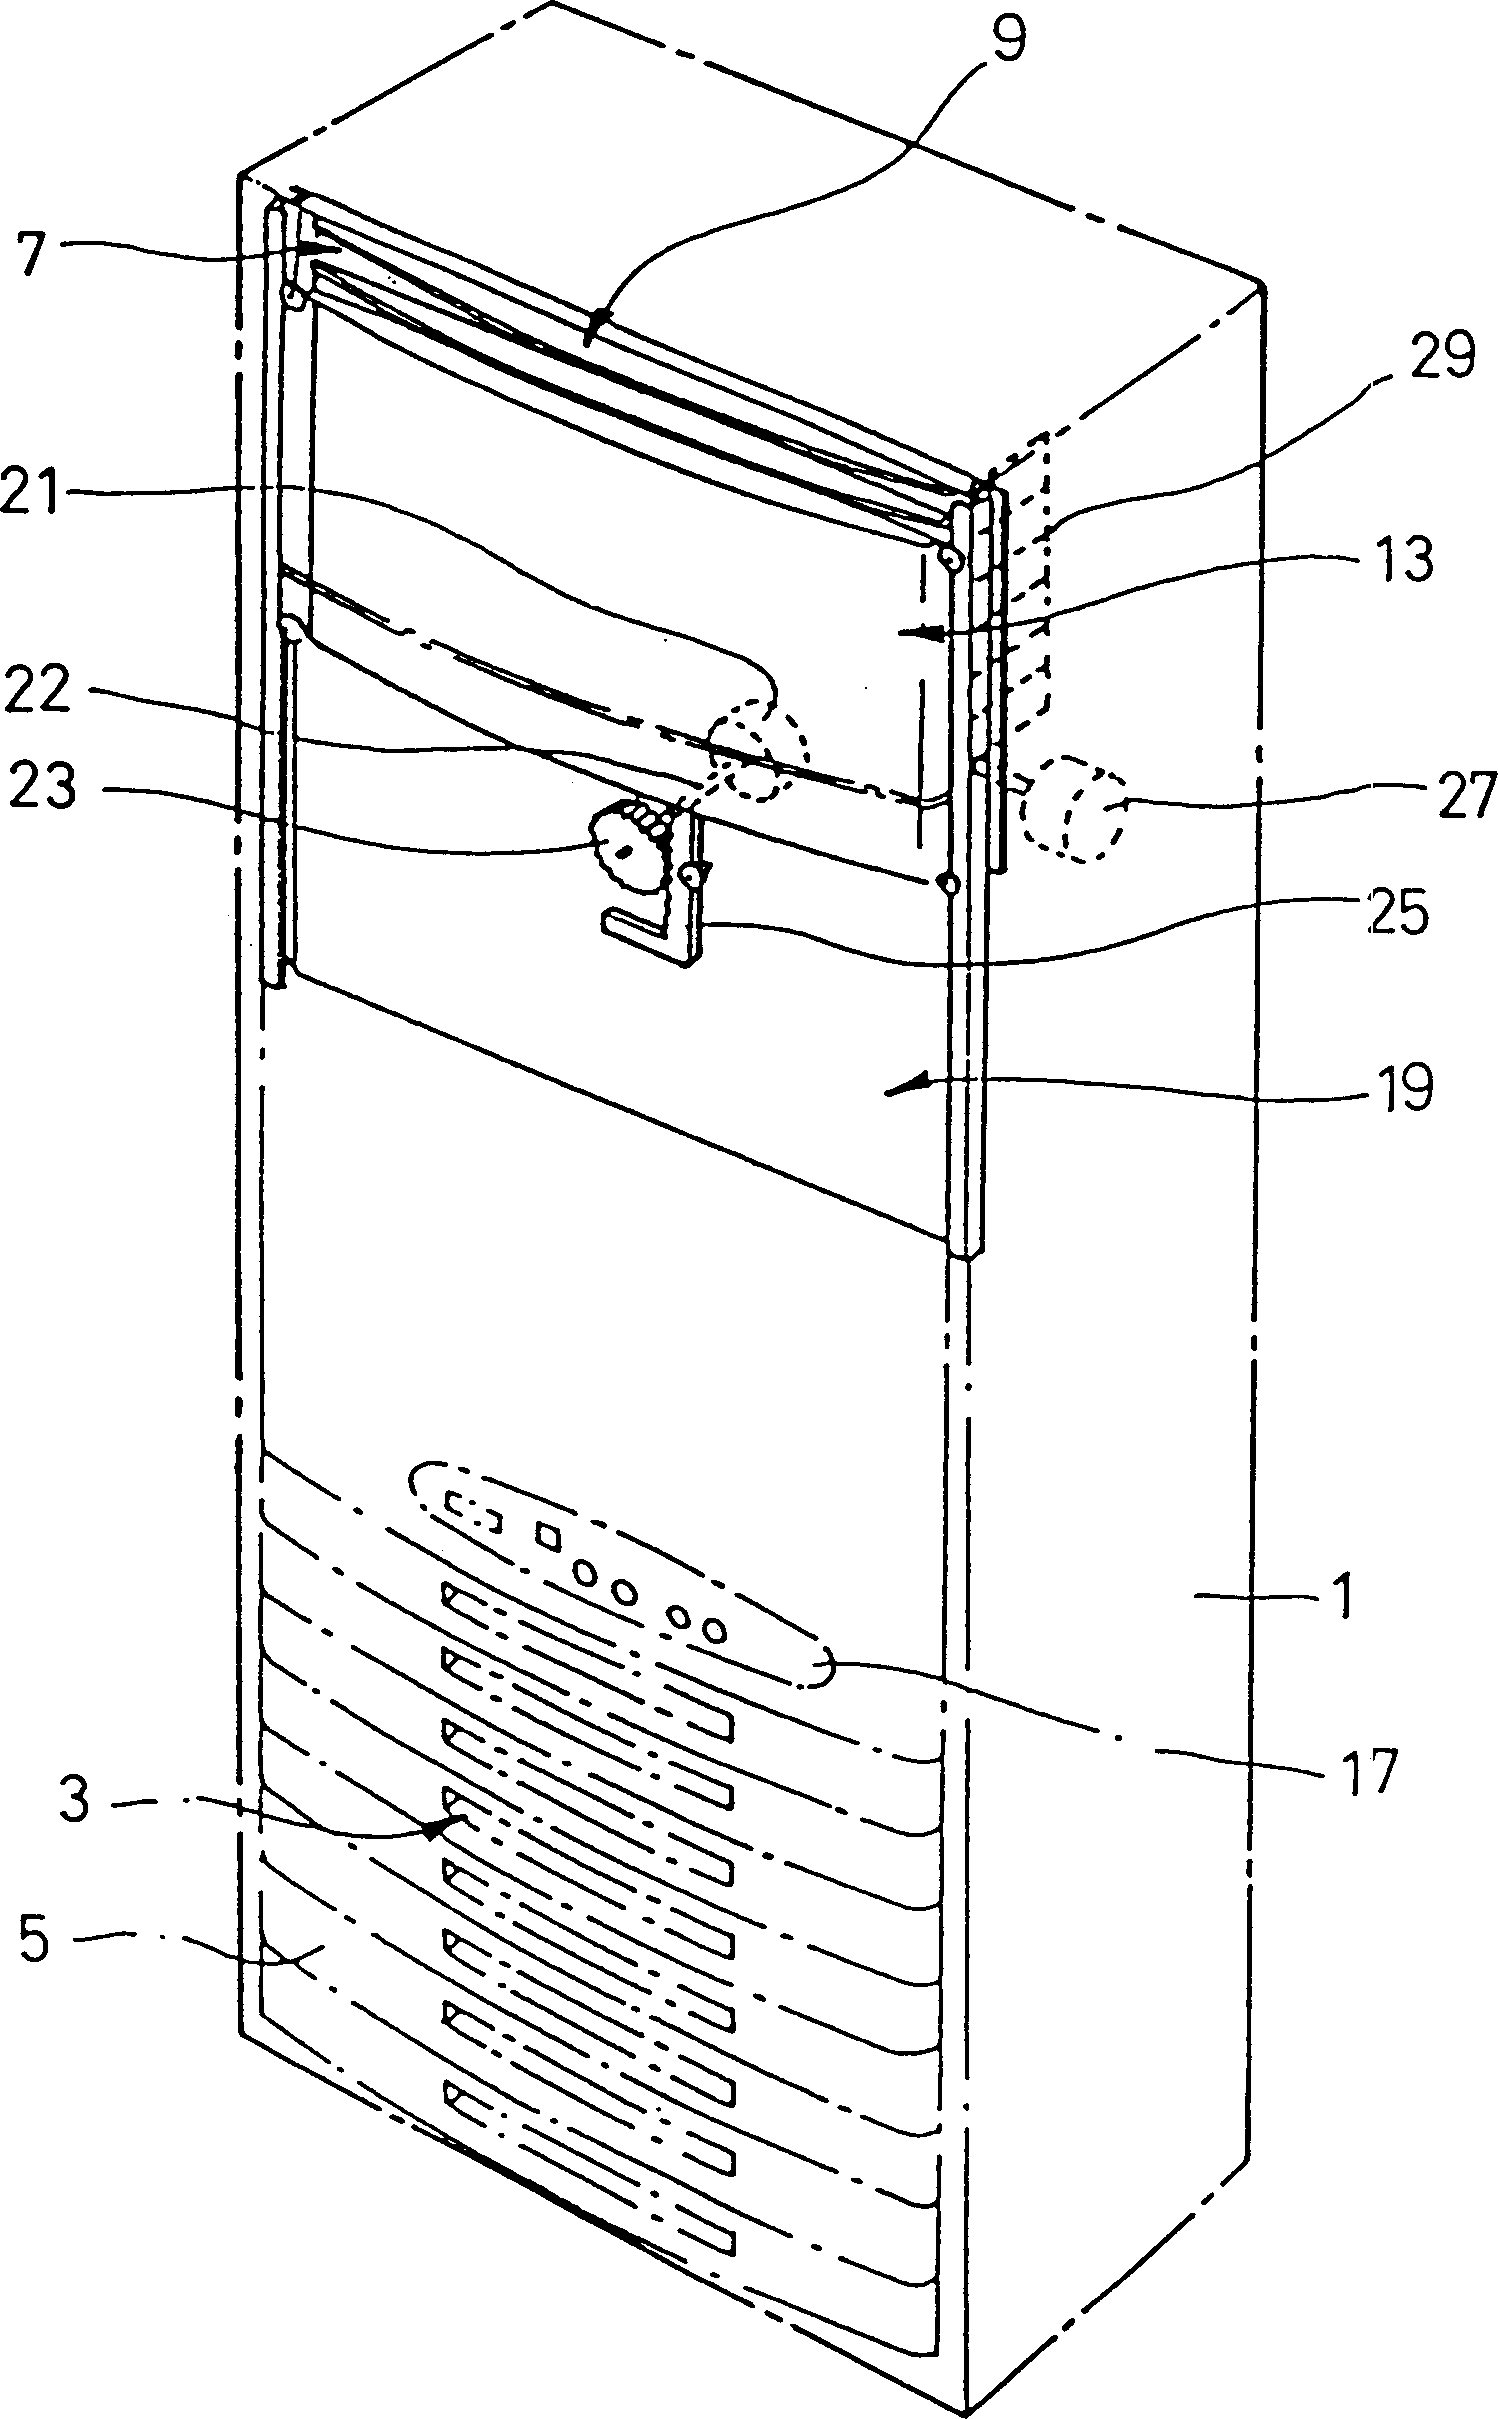 Device and method for controlling domestic equipment operation